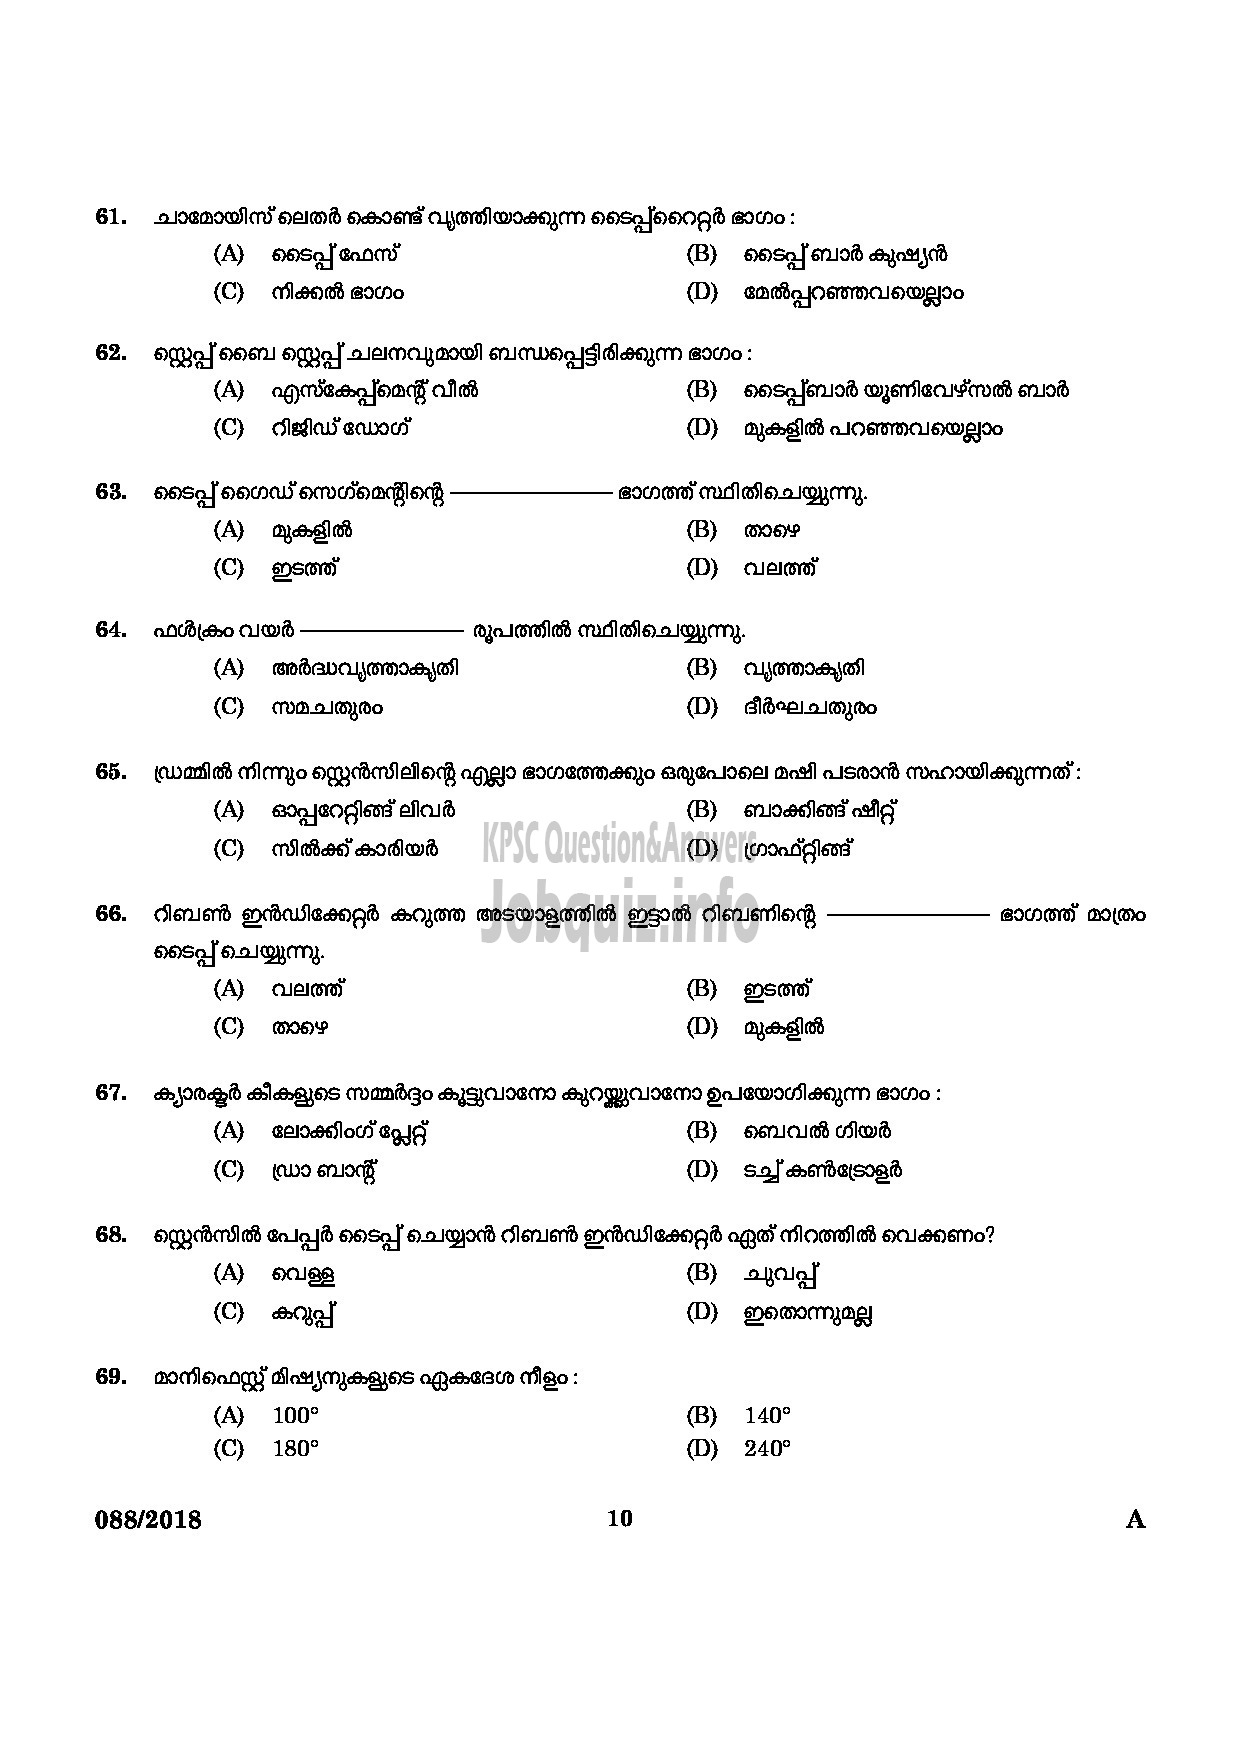 Kerala PSC Question Paper - REPORTER GR II MALAYALAM HEAD CONSTABLE GENERAL EXECUTIVE FORCE POLICE Malayalam-8